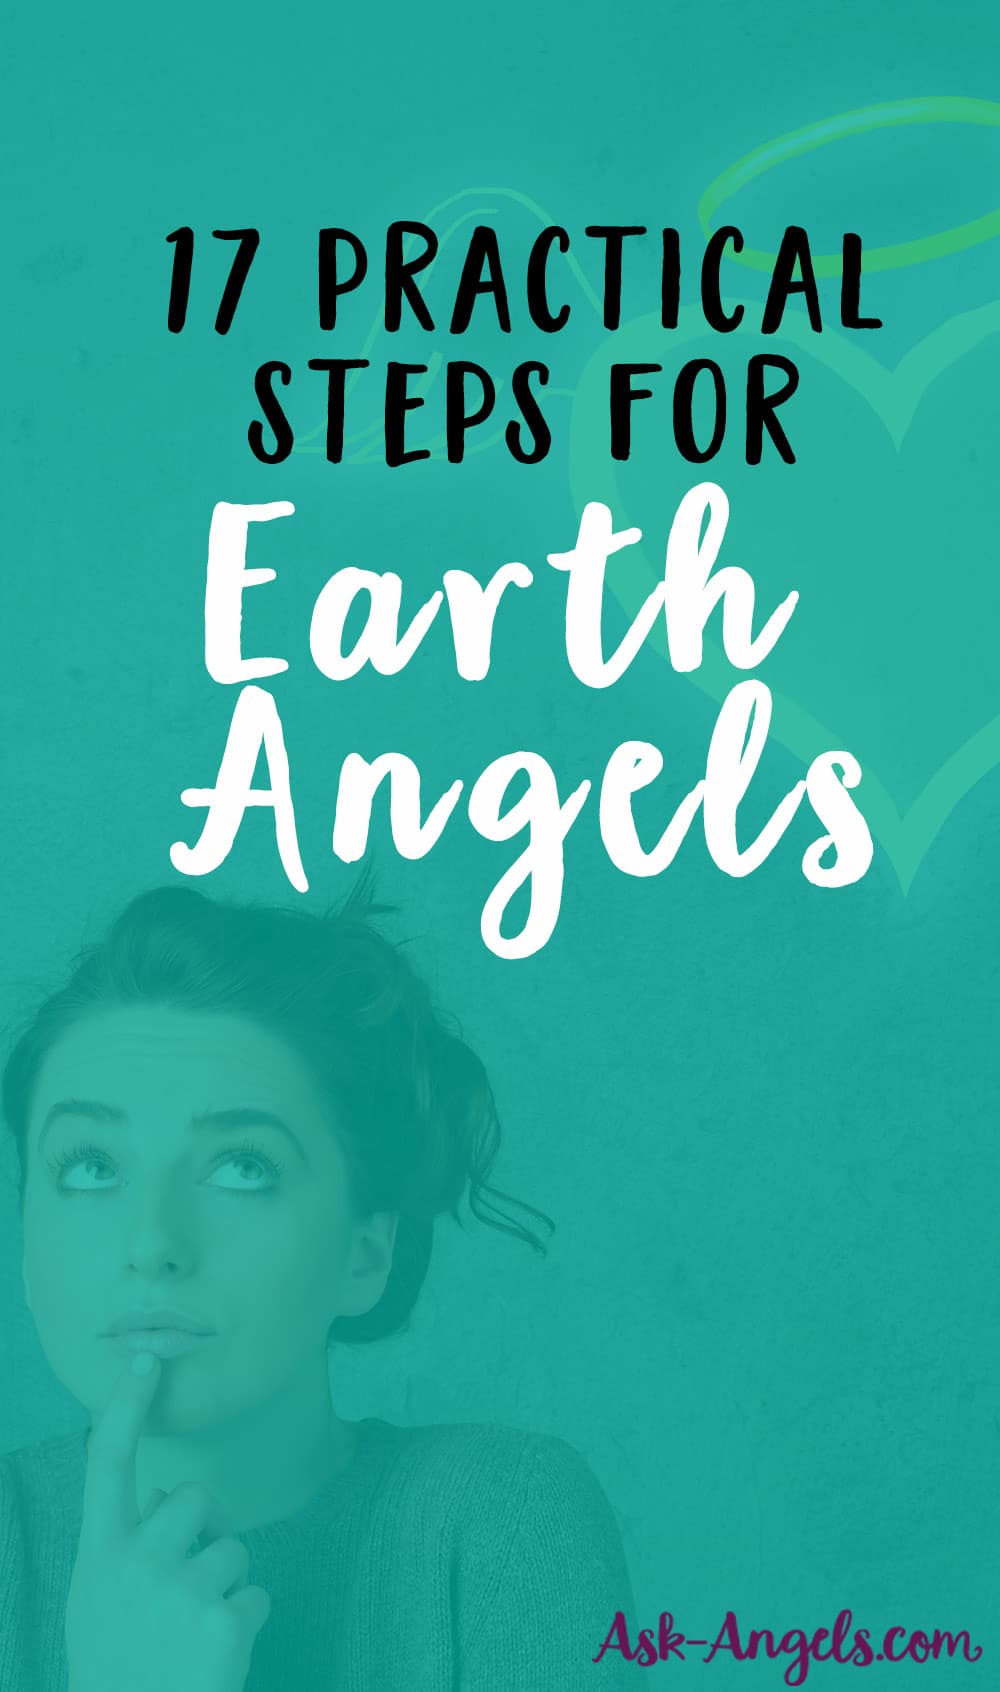 Steps for Earth Angels